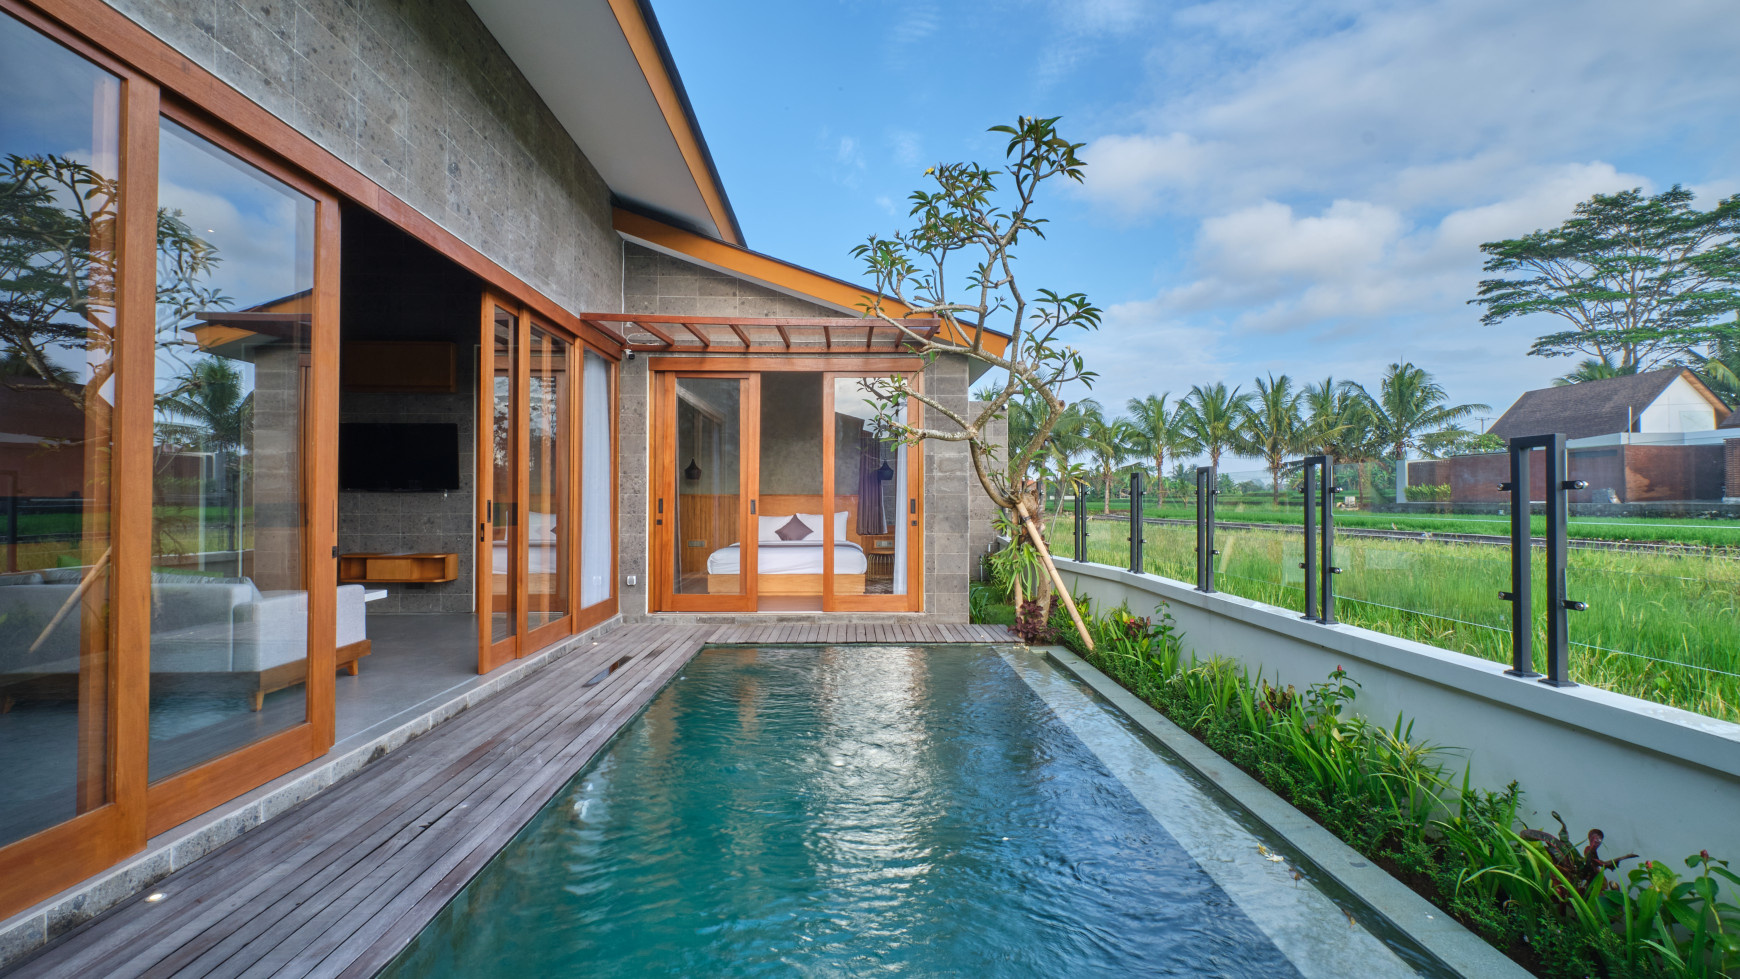 Brand New Two Bedroom Villa set on 216 sq m with rice field Views 10 Minutes from Ubud Center